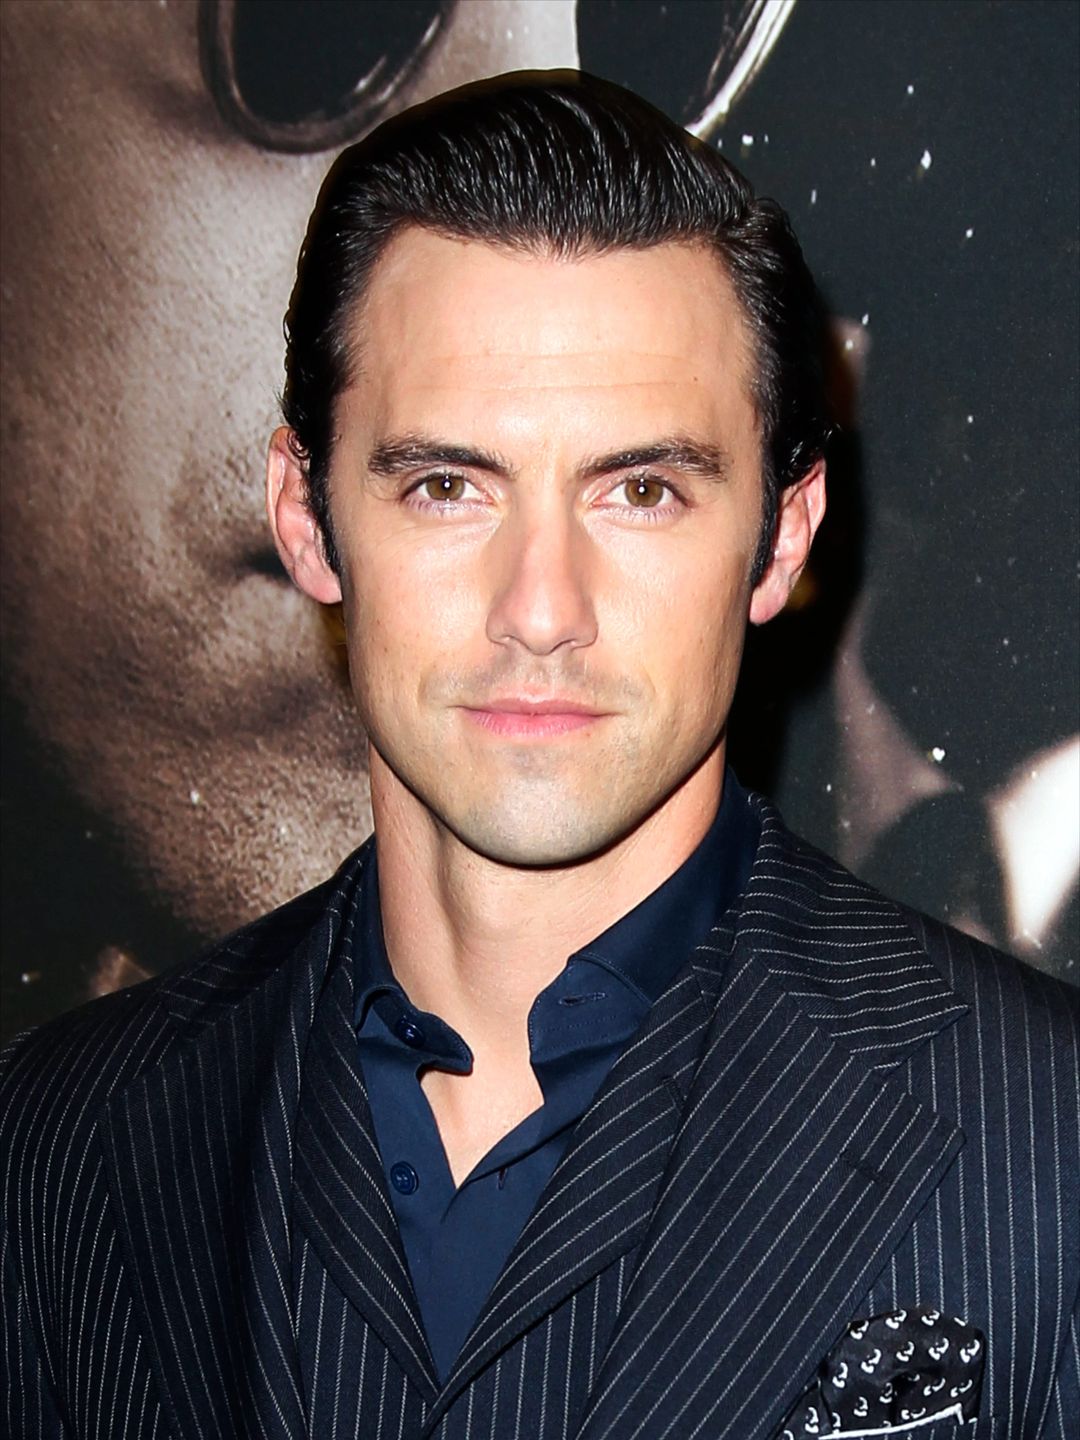 Milo Ventimiglia how did he became famous